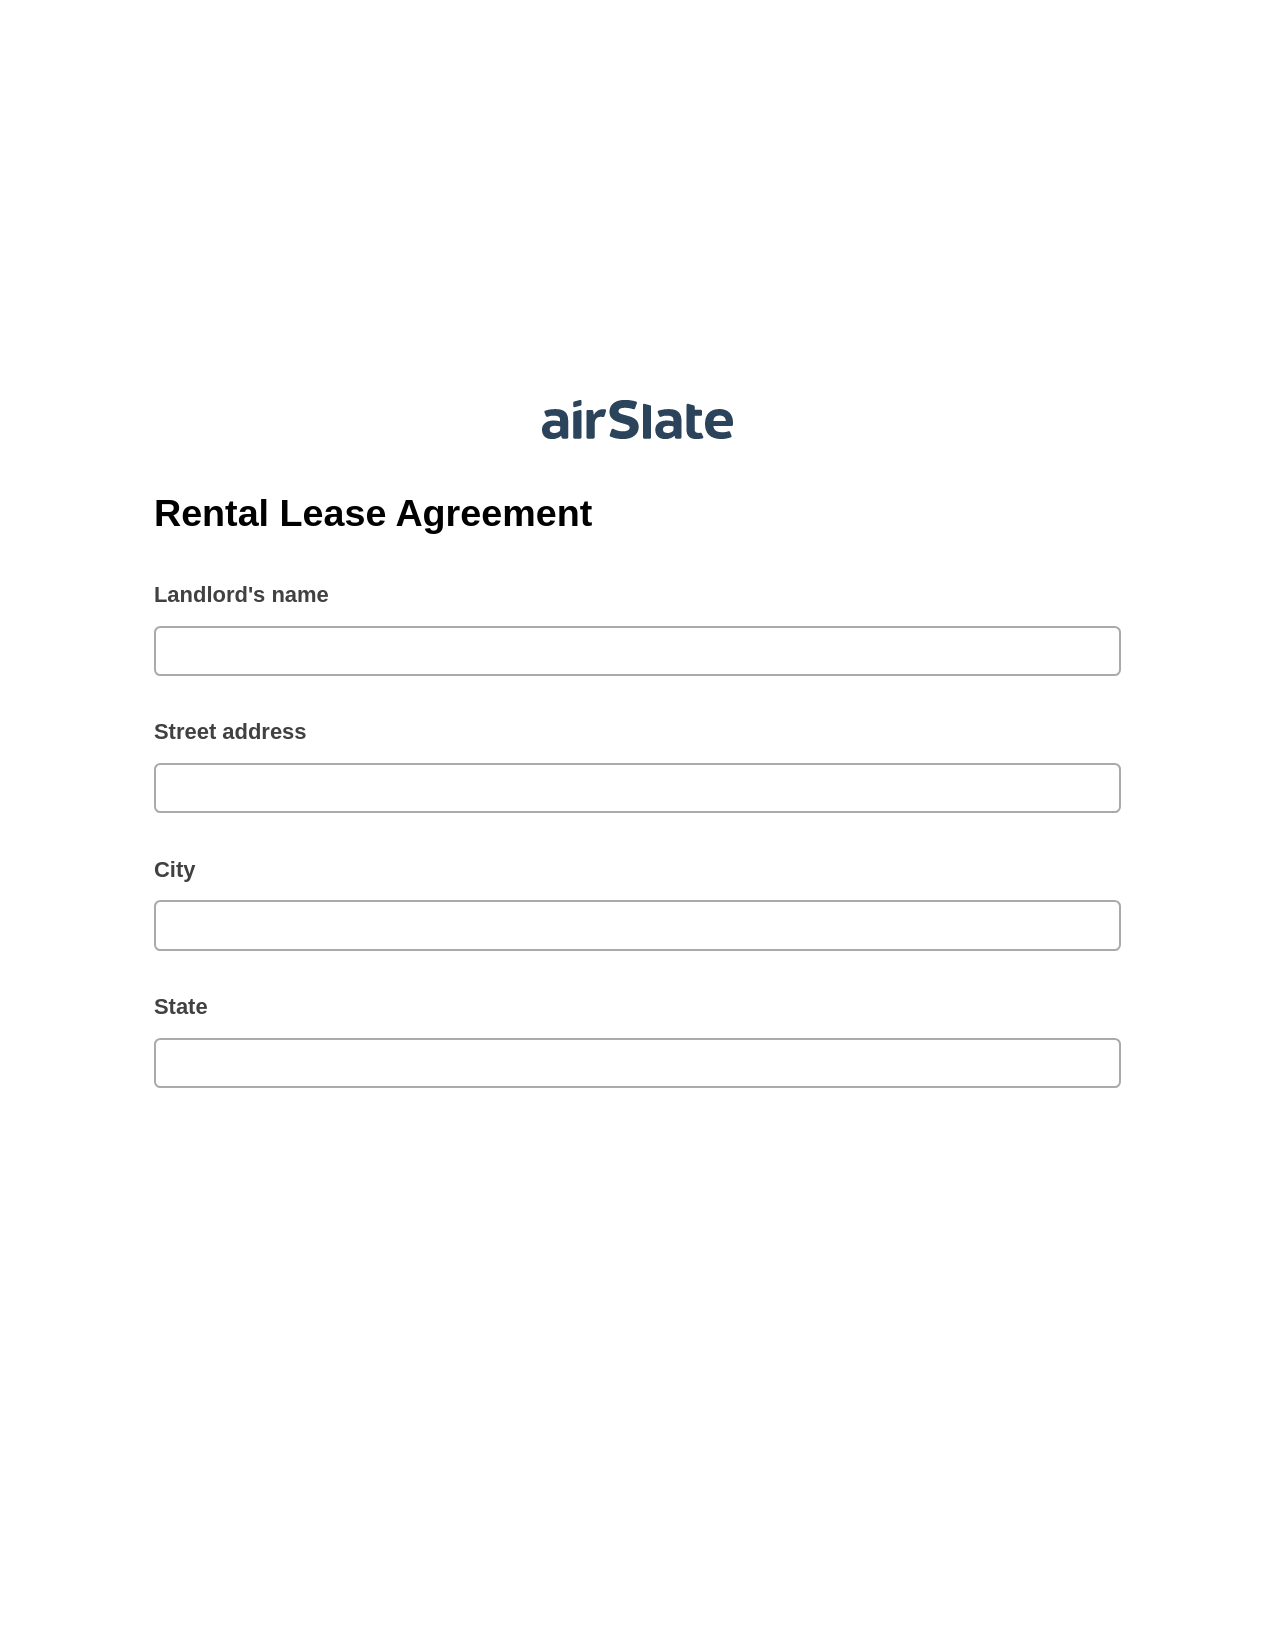 Multirole Rental Lease Agreement Pre-fill from CSV File Dropdown Options Bot, Assign Roles to Recipients Bot, Box Bot